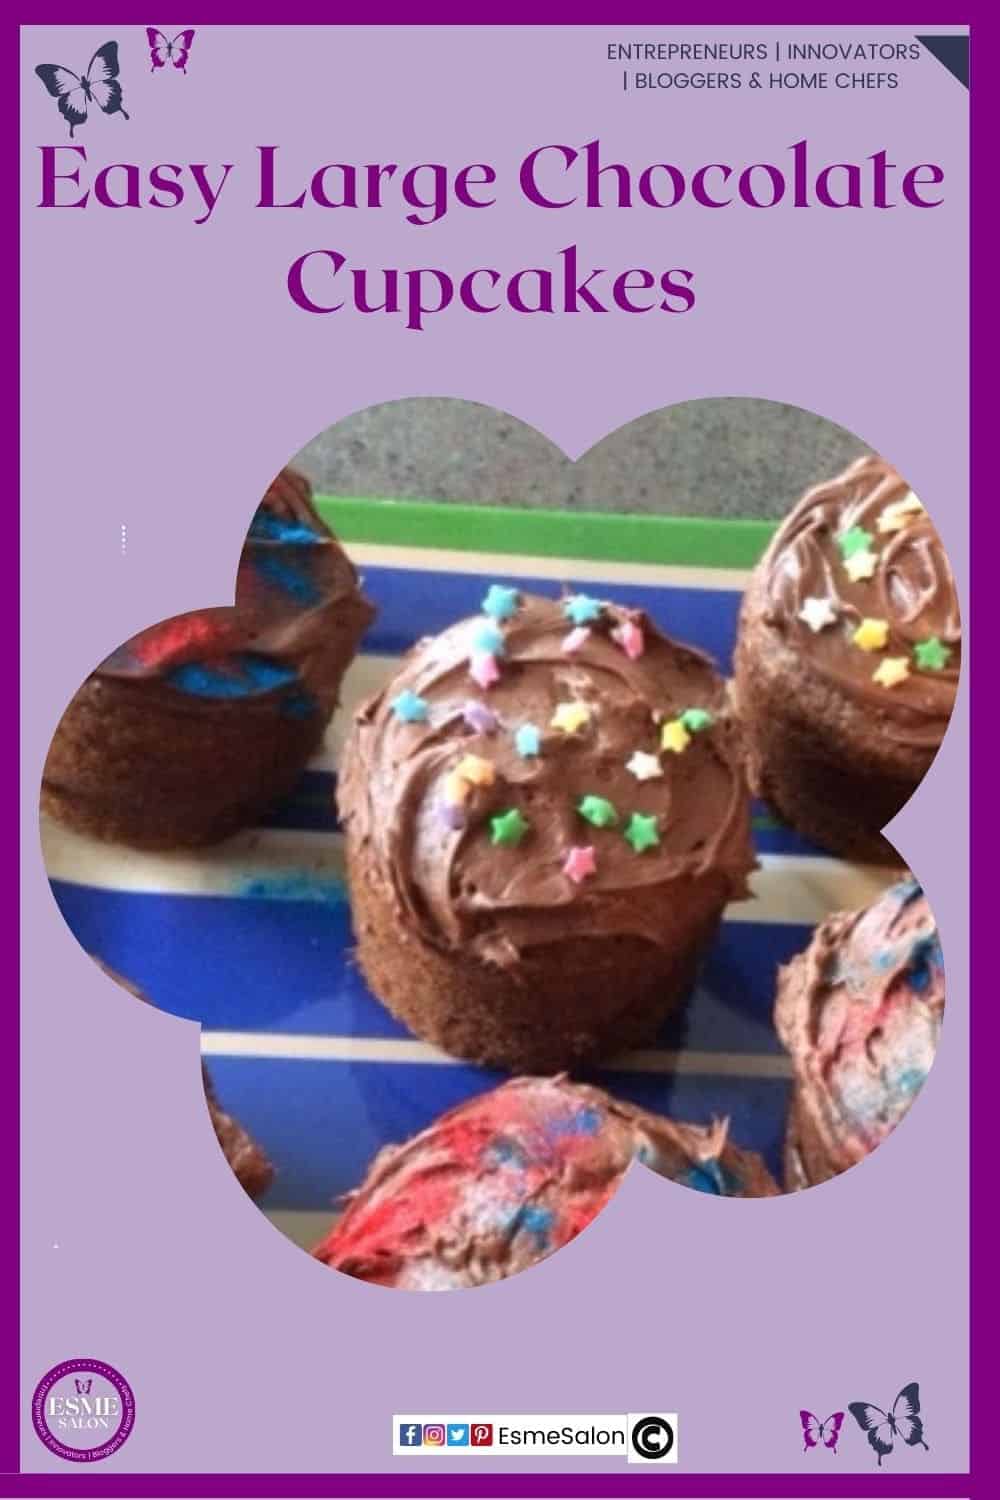 an image of 6 Large Chocolate Cupcakes on a square white and blue striped platter. Cupcakes covered with chocolate topping and colored sprinkles